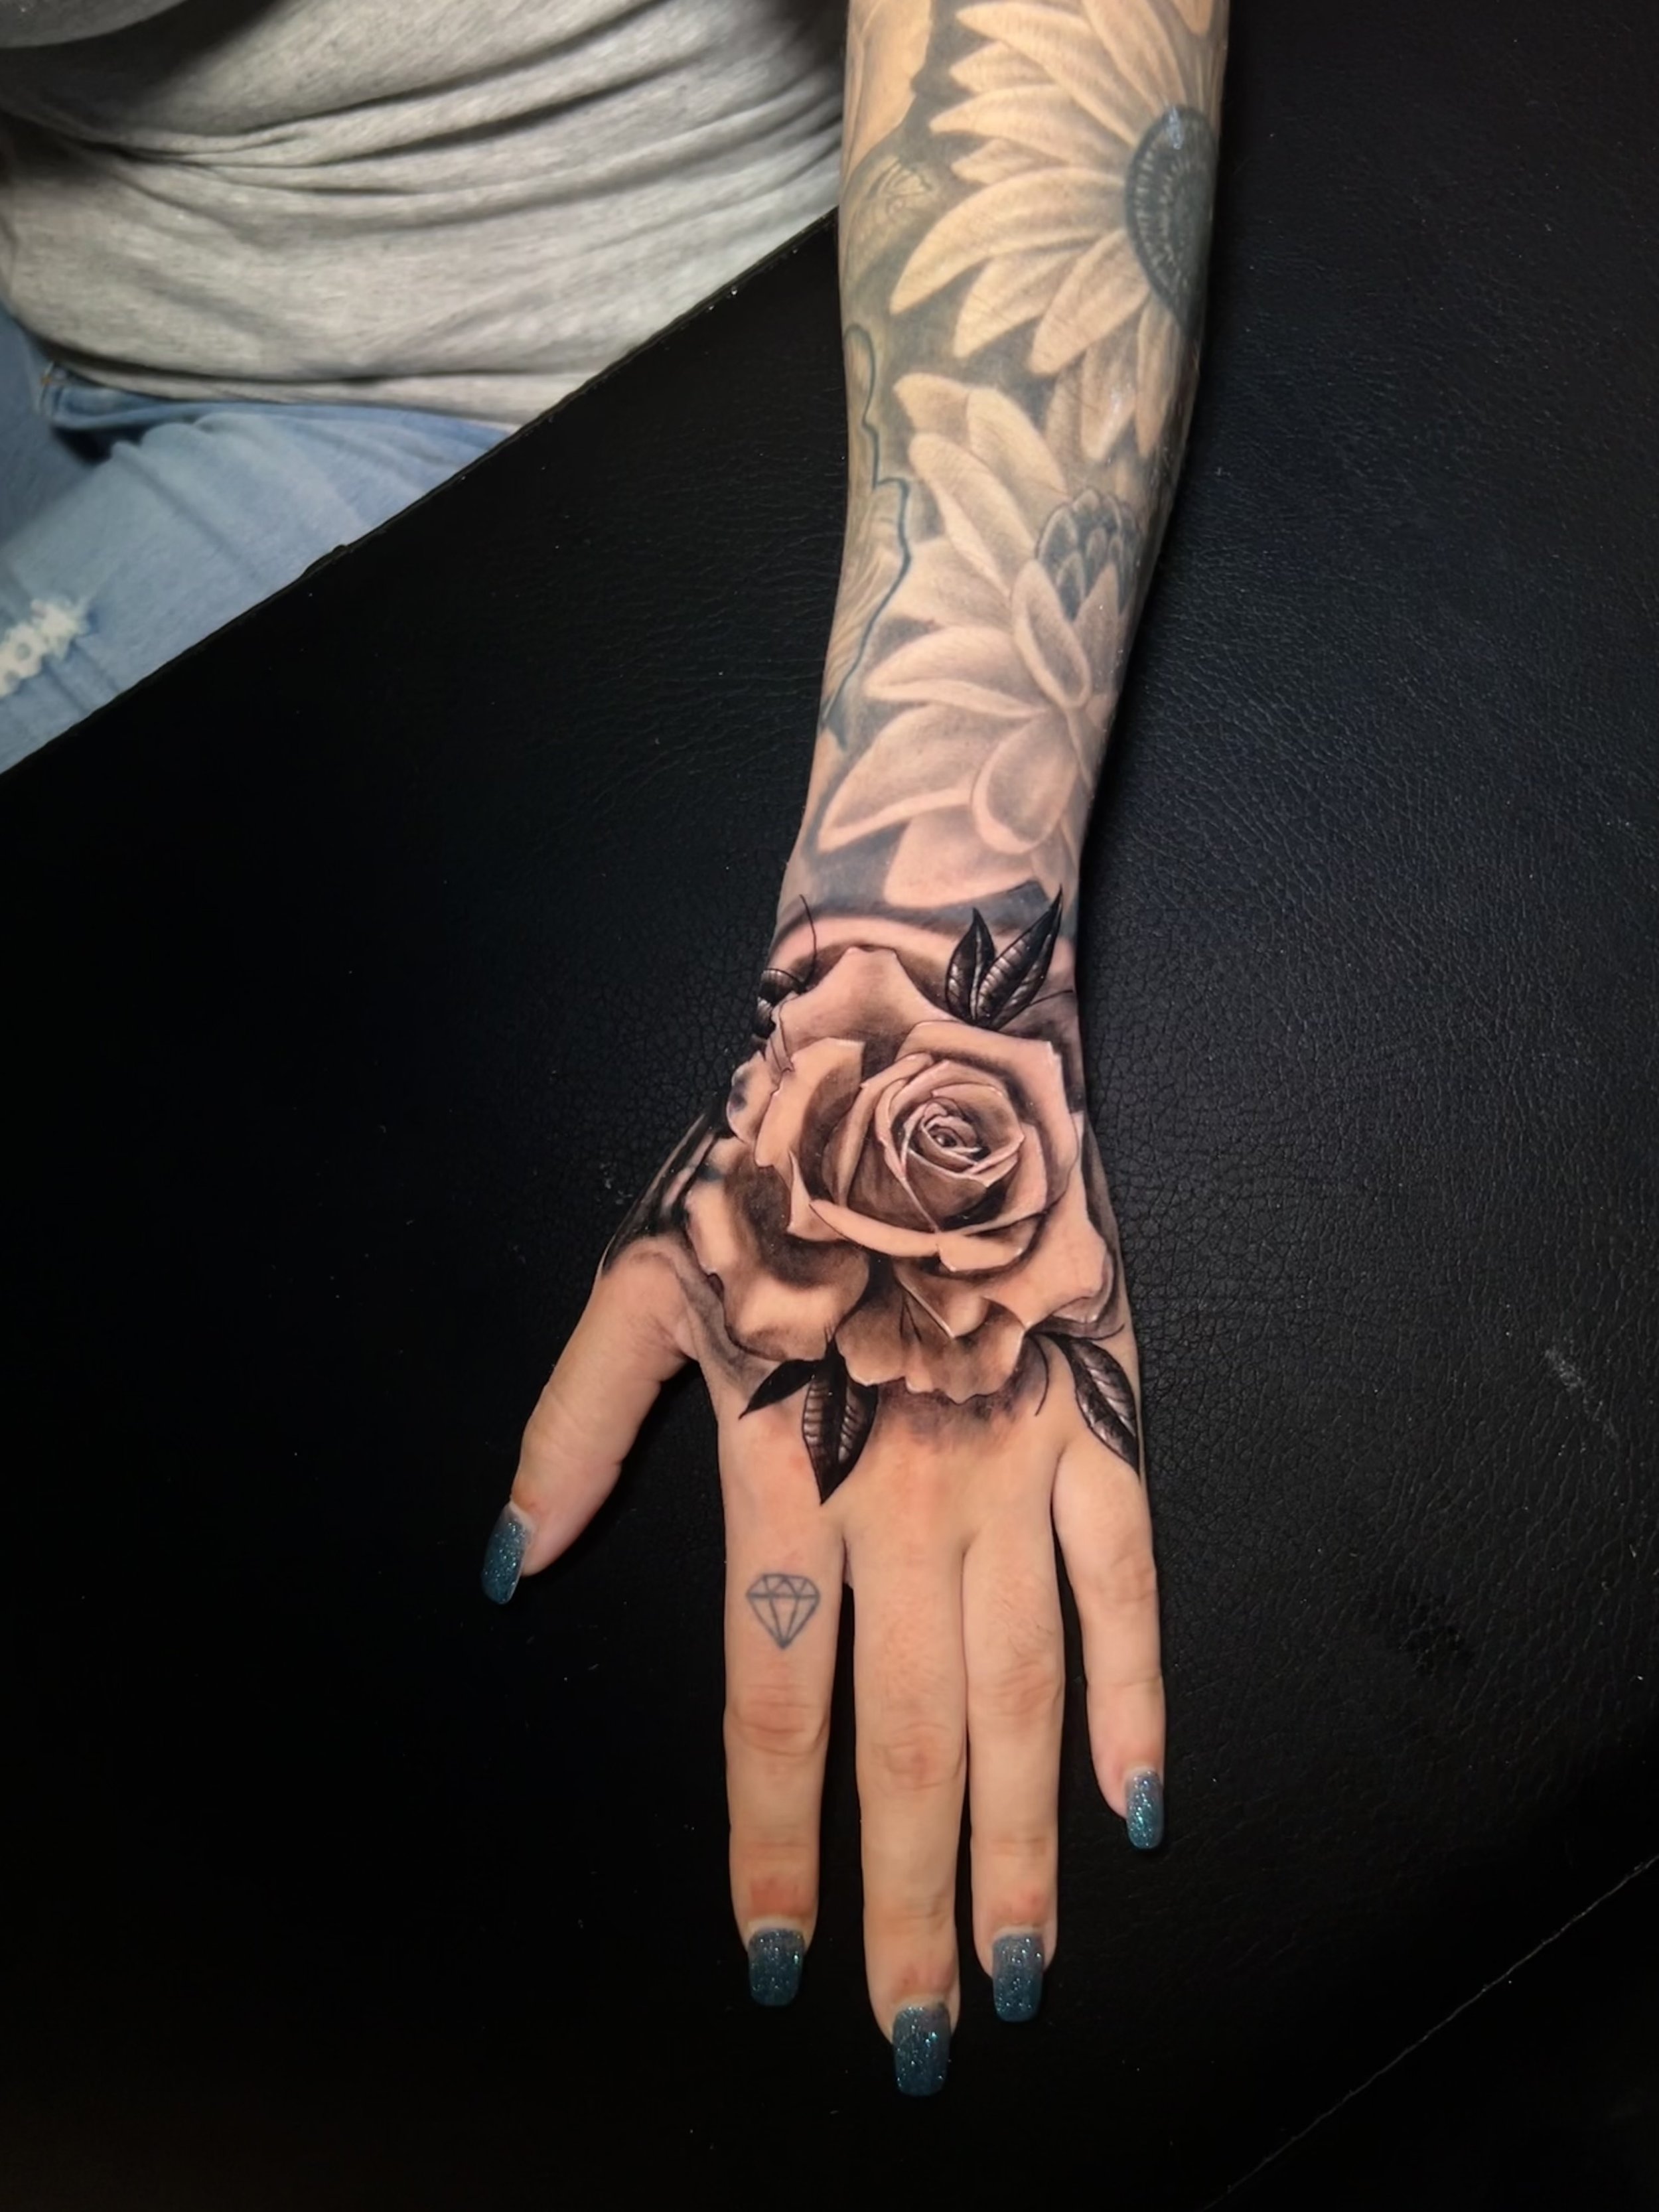 rose in the hand